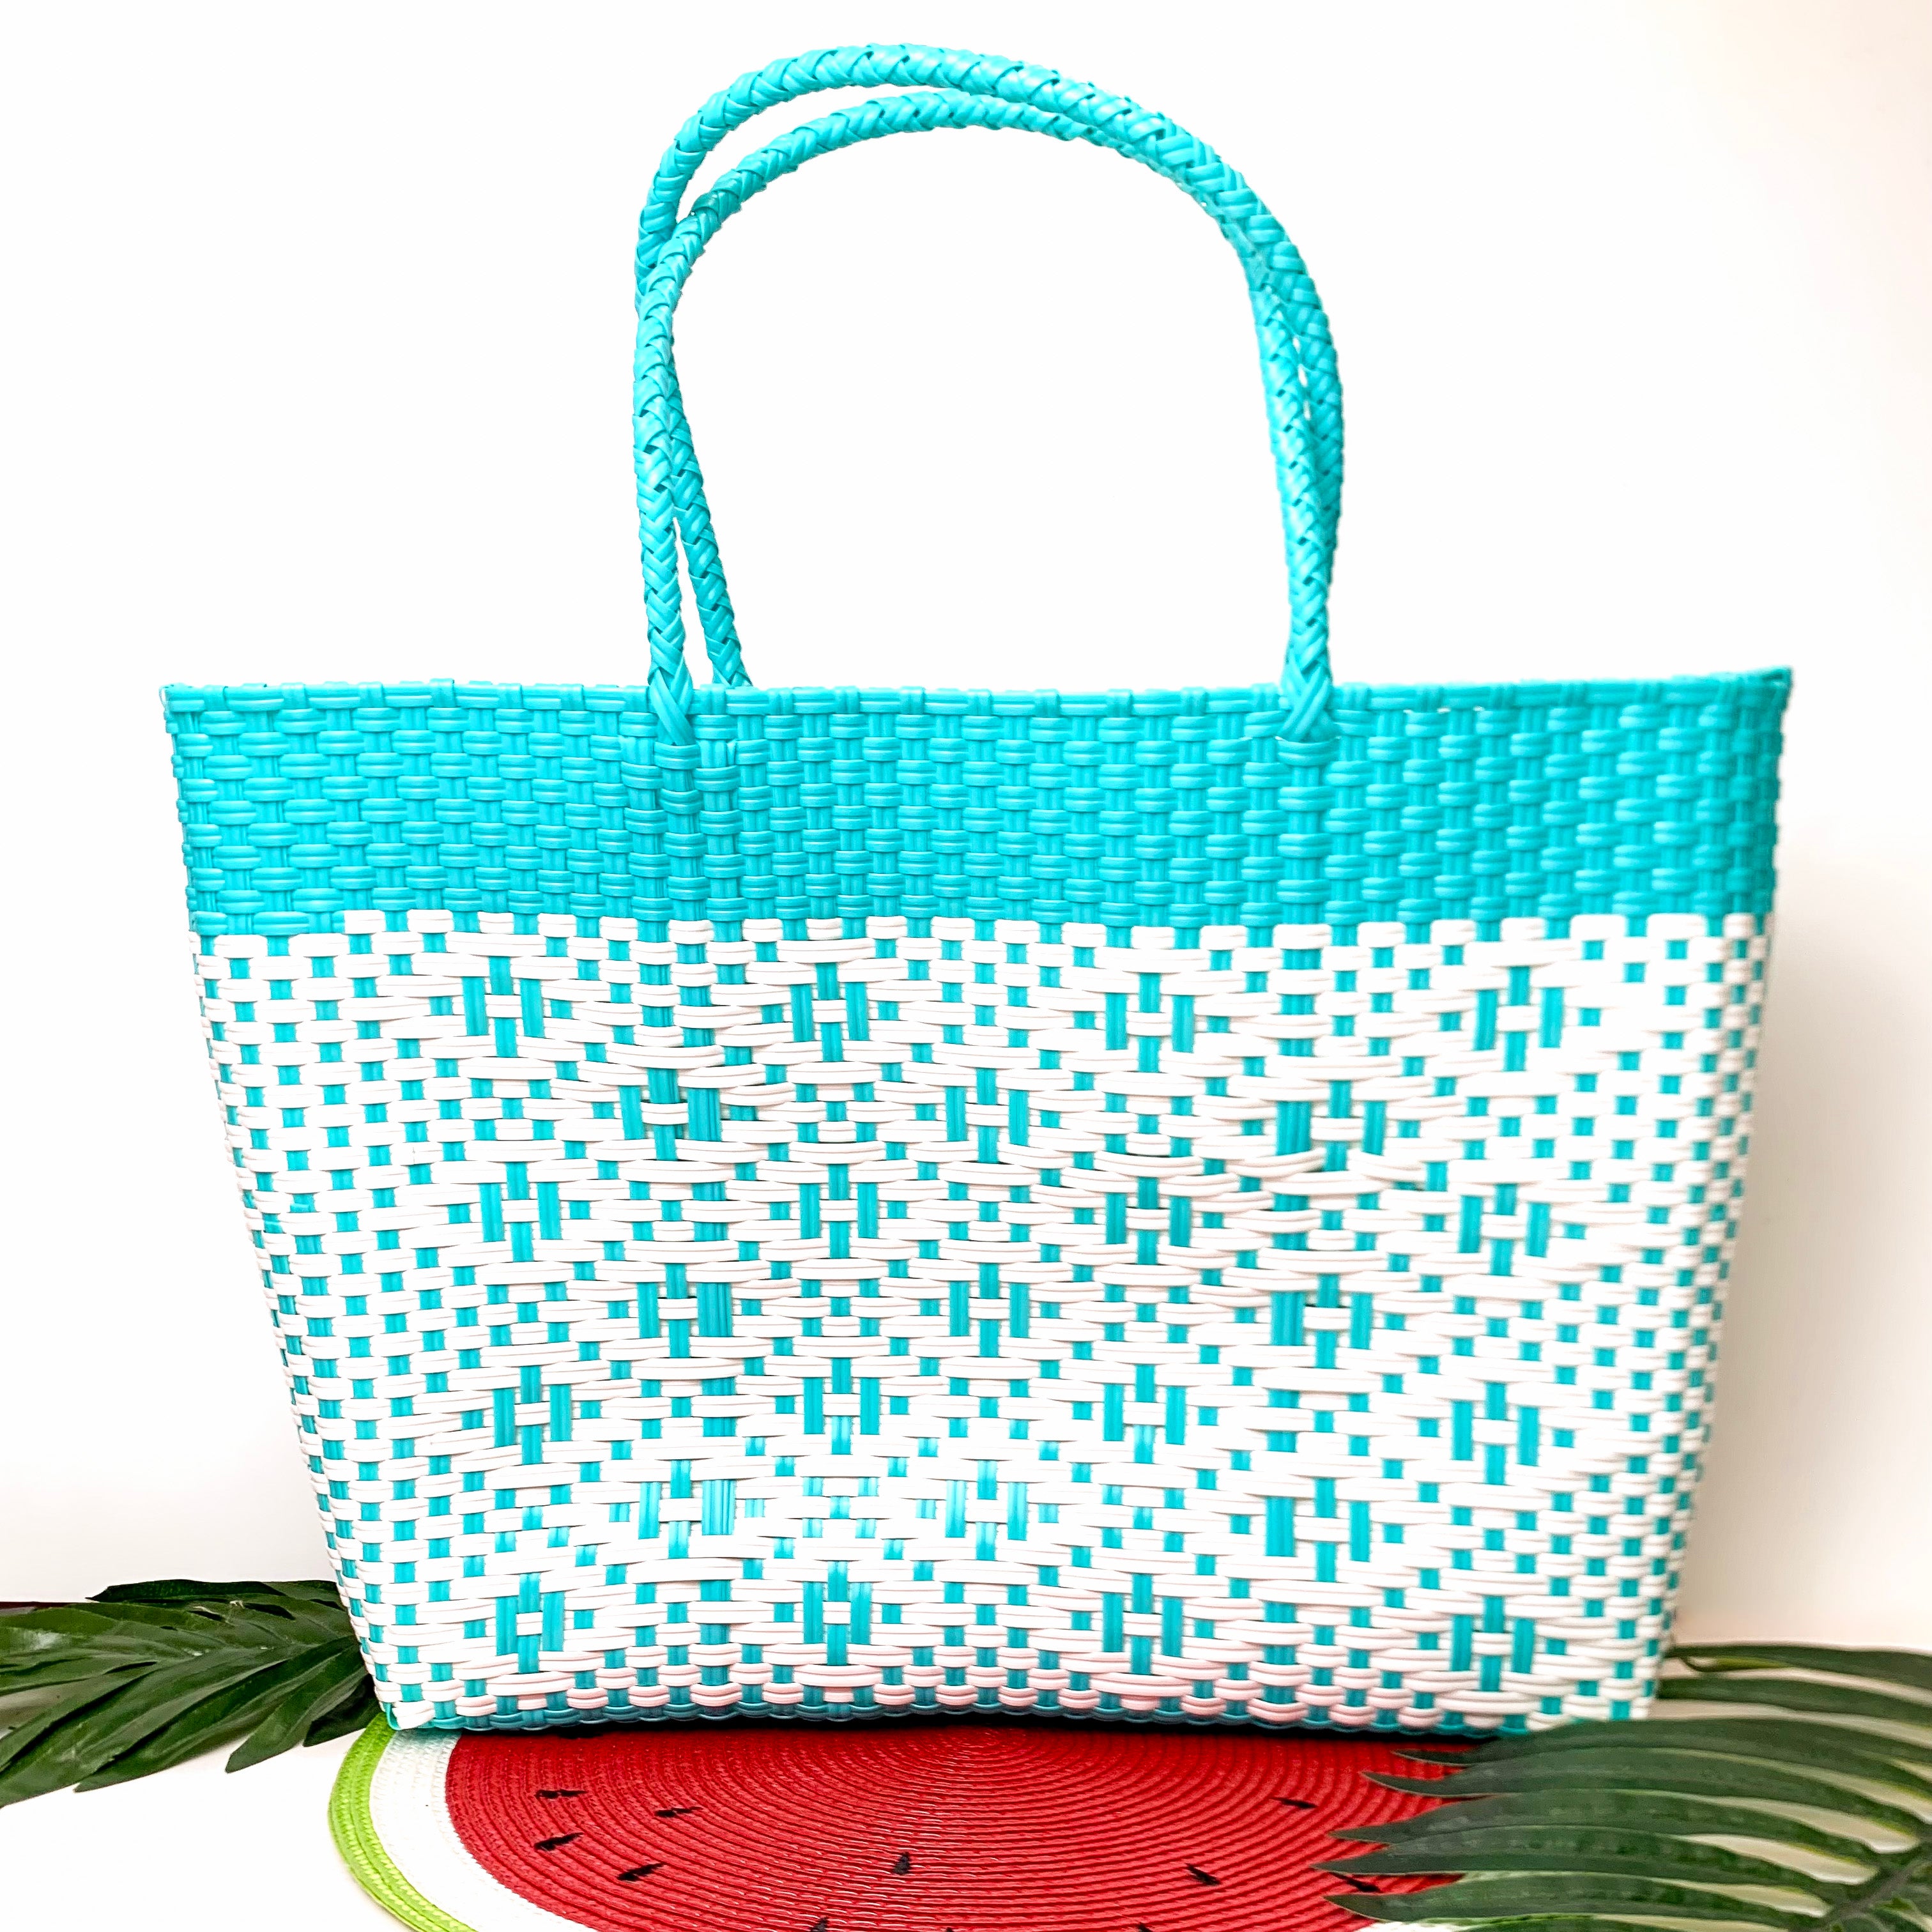 Sonoran Sky Market Tote Bag in Turquoise Blue and White